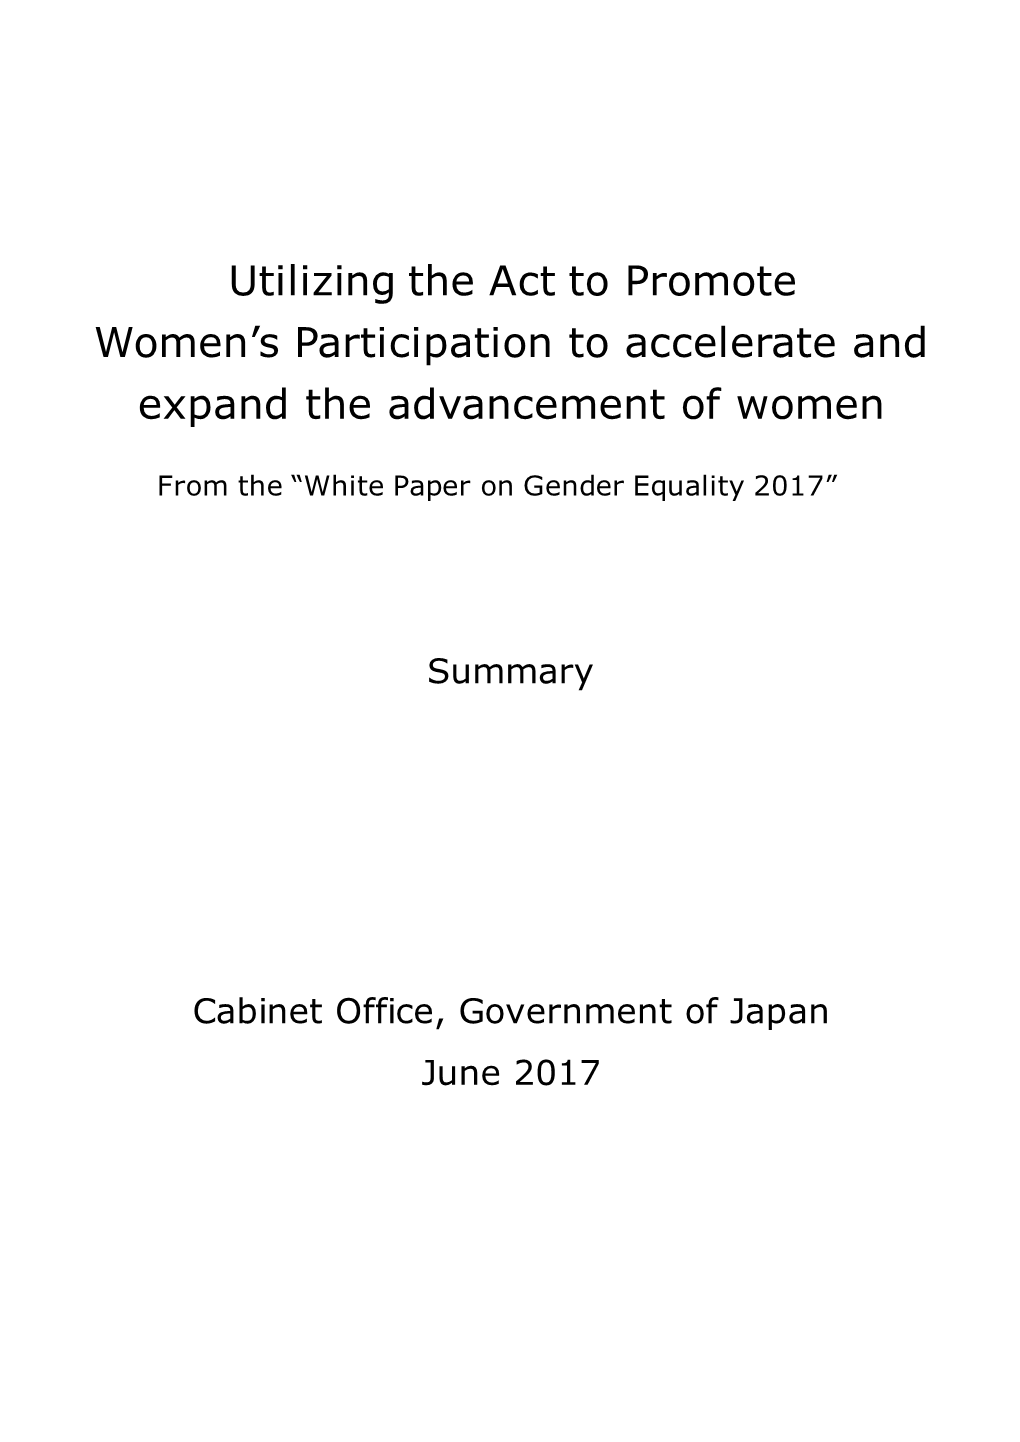 Utilizing the Act to Promote Women's Participation to Accelerate And